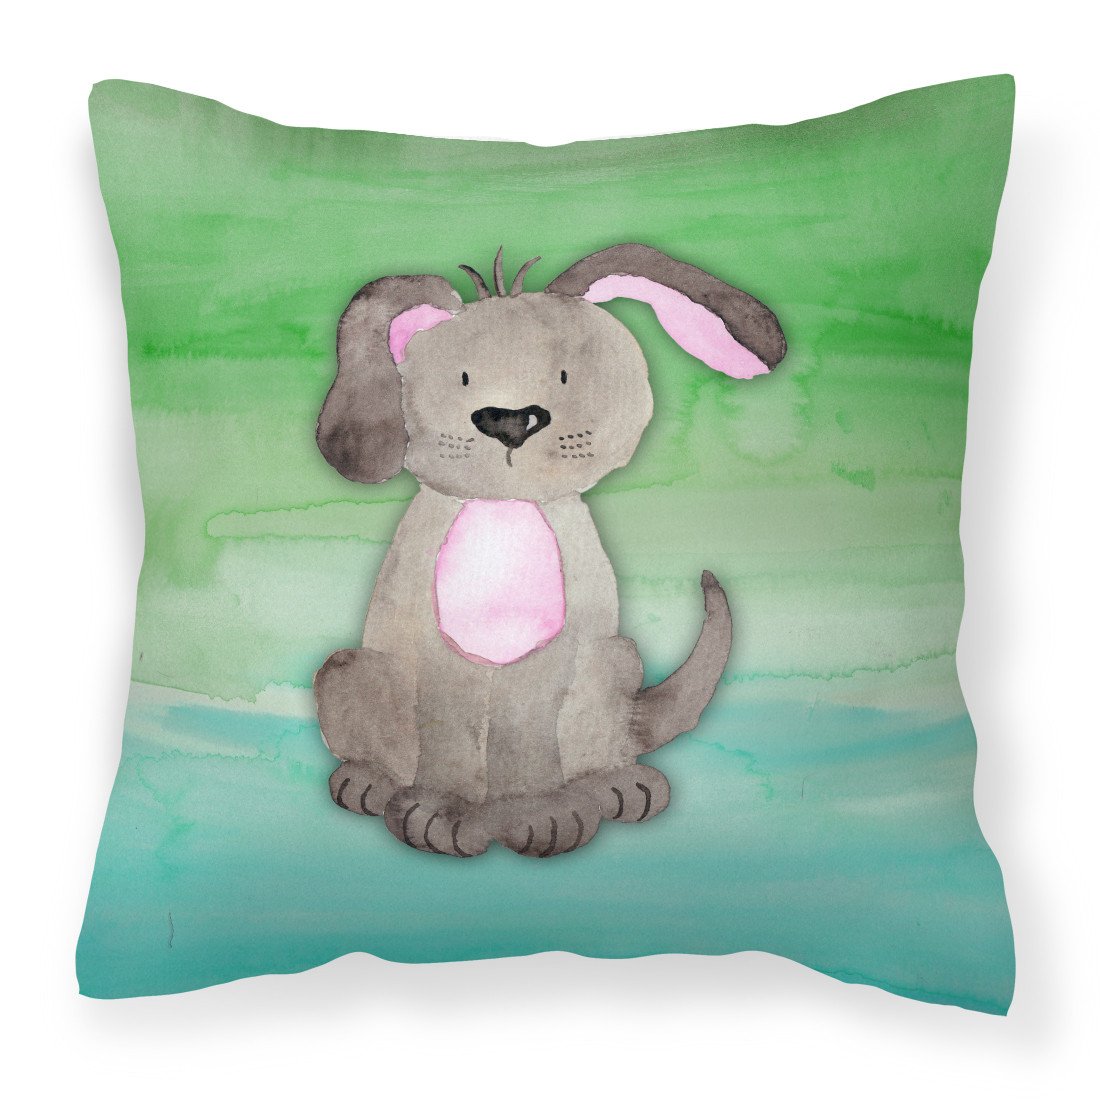 Dog Teal and Green Watercolor Fabric Decorative Pillow BB7357PW1818 by Caroline's Treasures